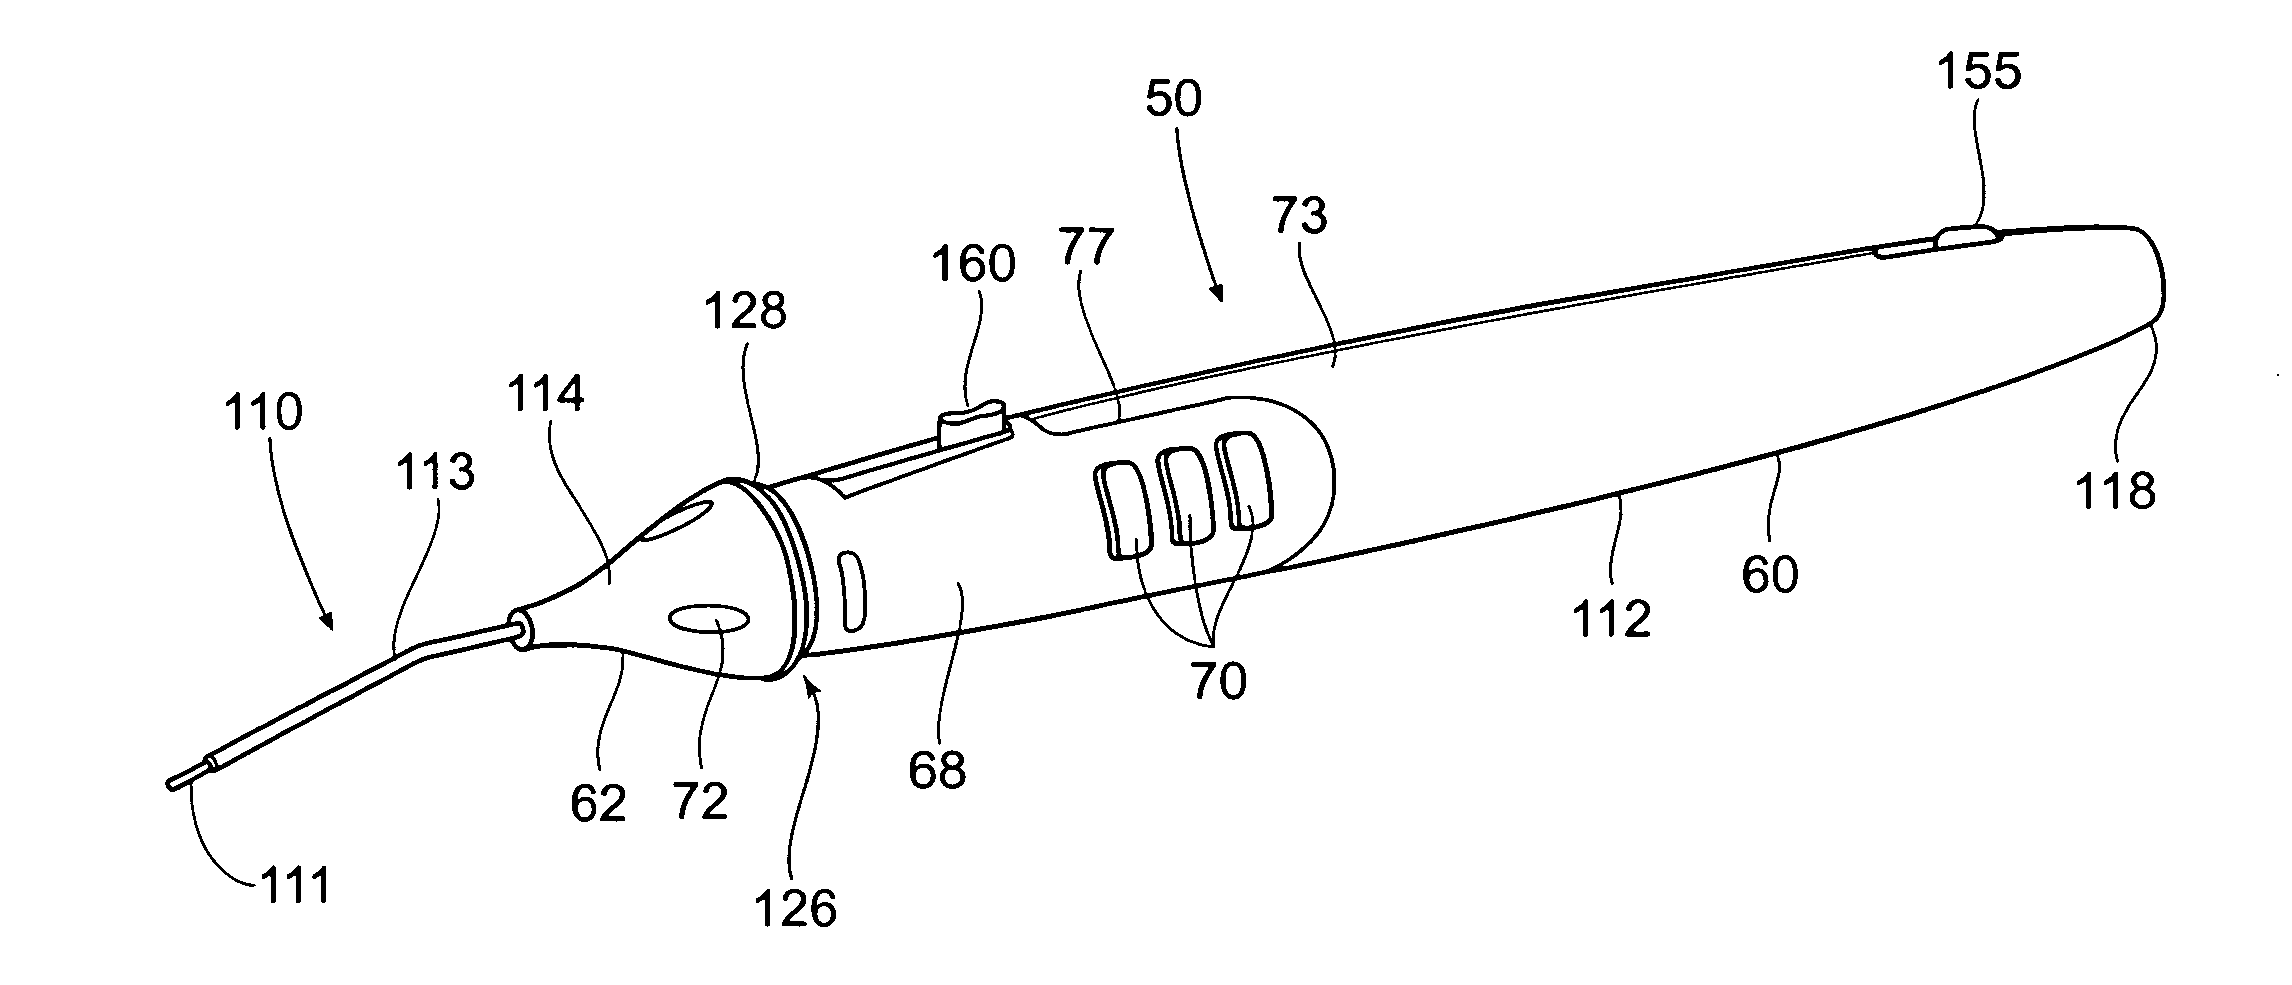 Systems and methods for intra-operative stimulation within a surgical field